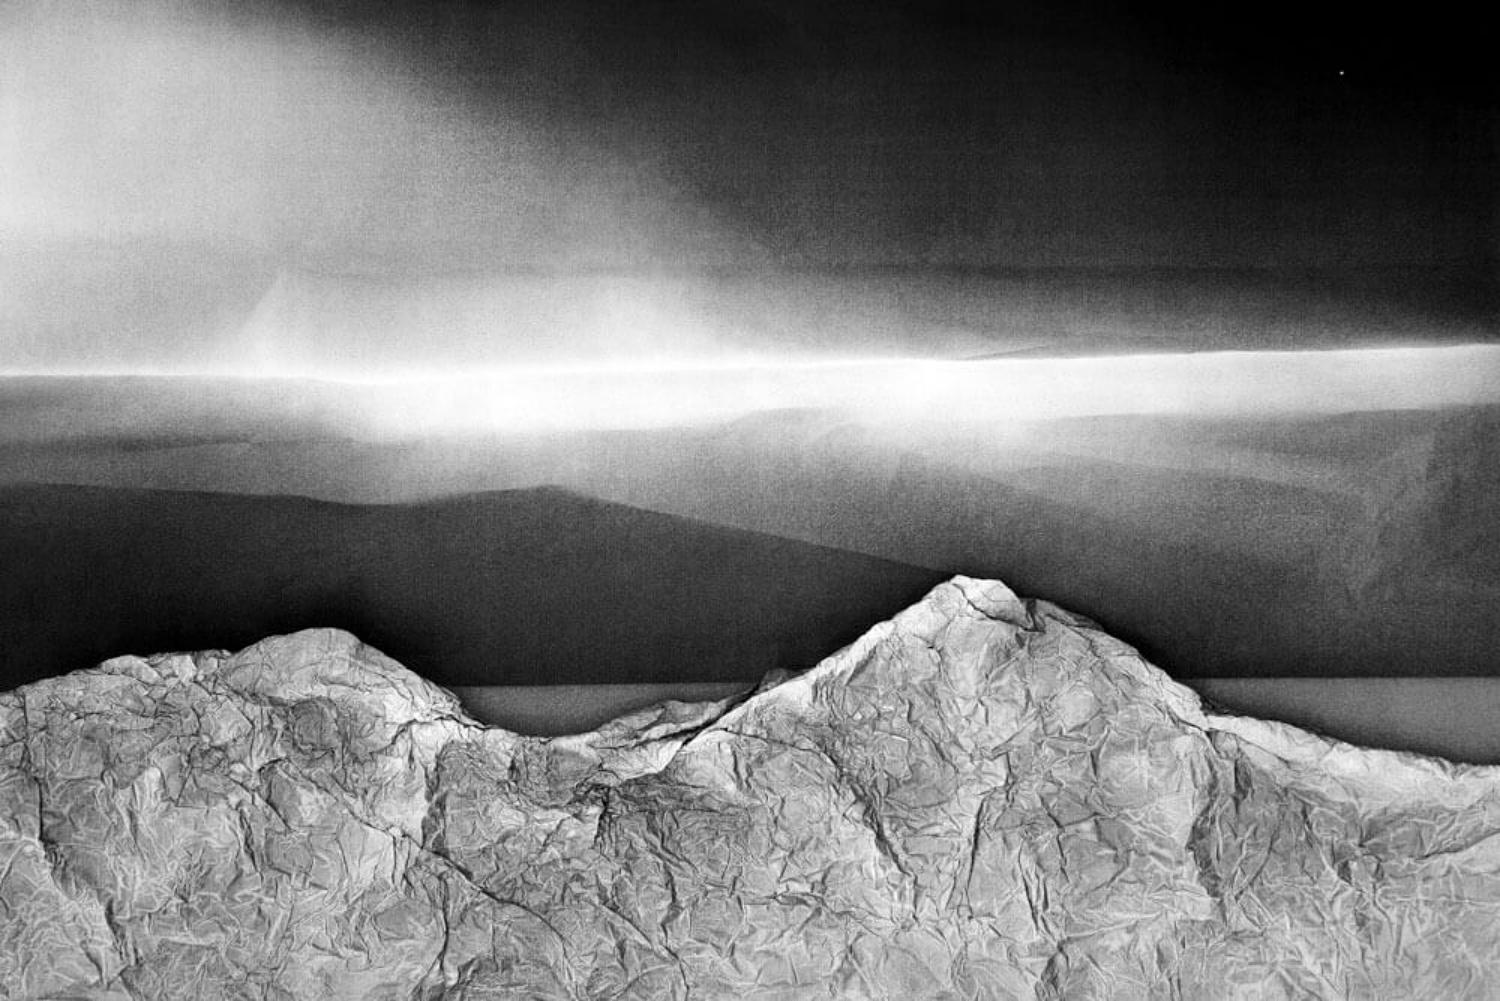 Dominique TEUFEN (*1975, Switzerland)
Sunrise, 2018
From the series „MY TRAVELS THROUGH THE WORLD ON MY COPY MACHINE”
Hahnemühle Fine Art Baryta
Sheet 60 x 90 cm (23 5/8 x 35 3/8 in.) 
Frame 64,7 x 94,7 x 4 cm (25 1/2 x 37 1/4 x 1 5/8 in.)
Edition